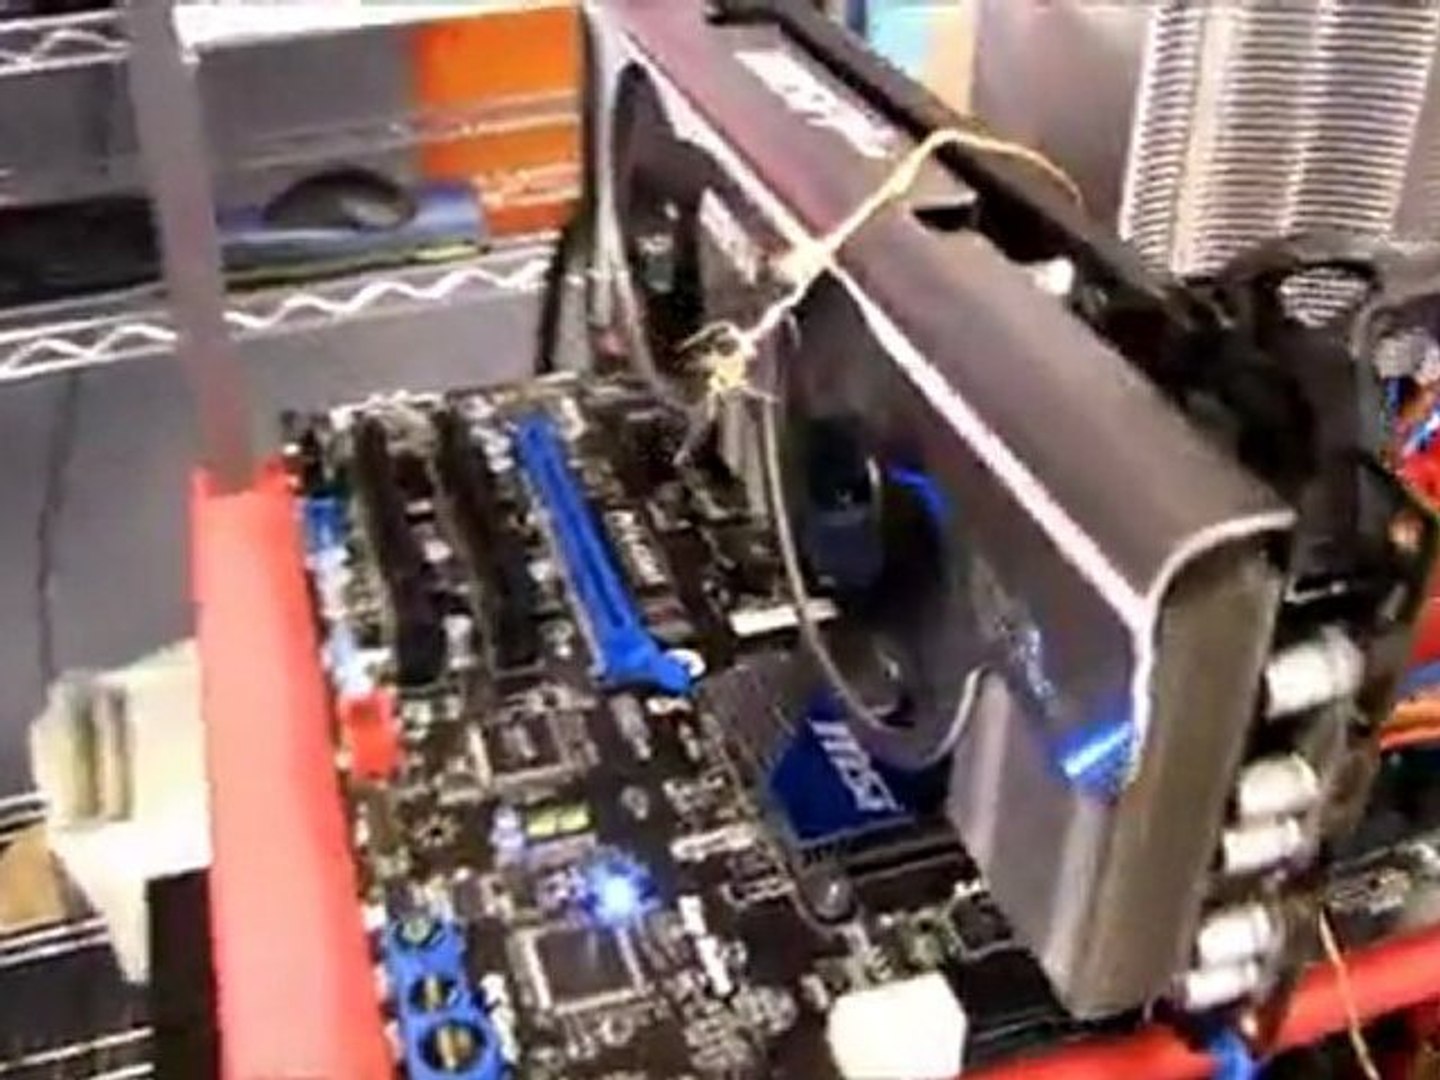 MSI GTX 580 Twin Frozr II vs Reference Card Temp Comparison Linus Tech Tips  - video Dailymotion